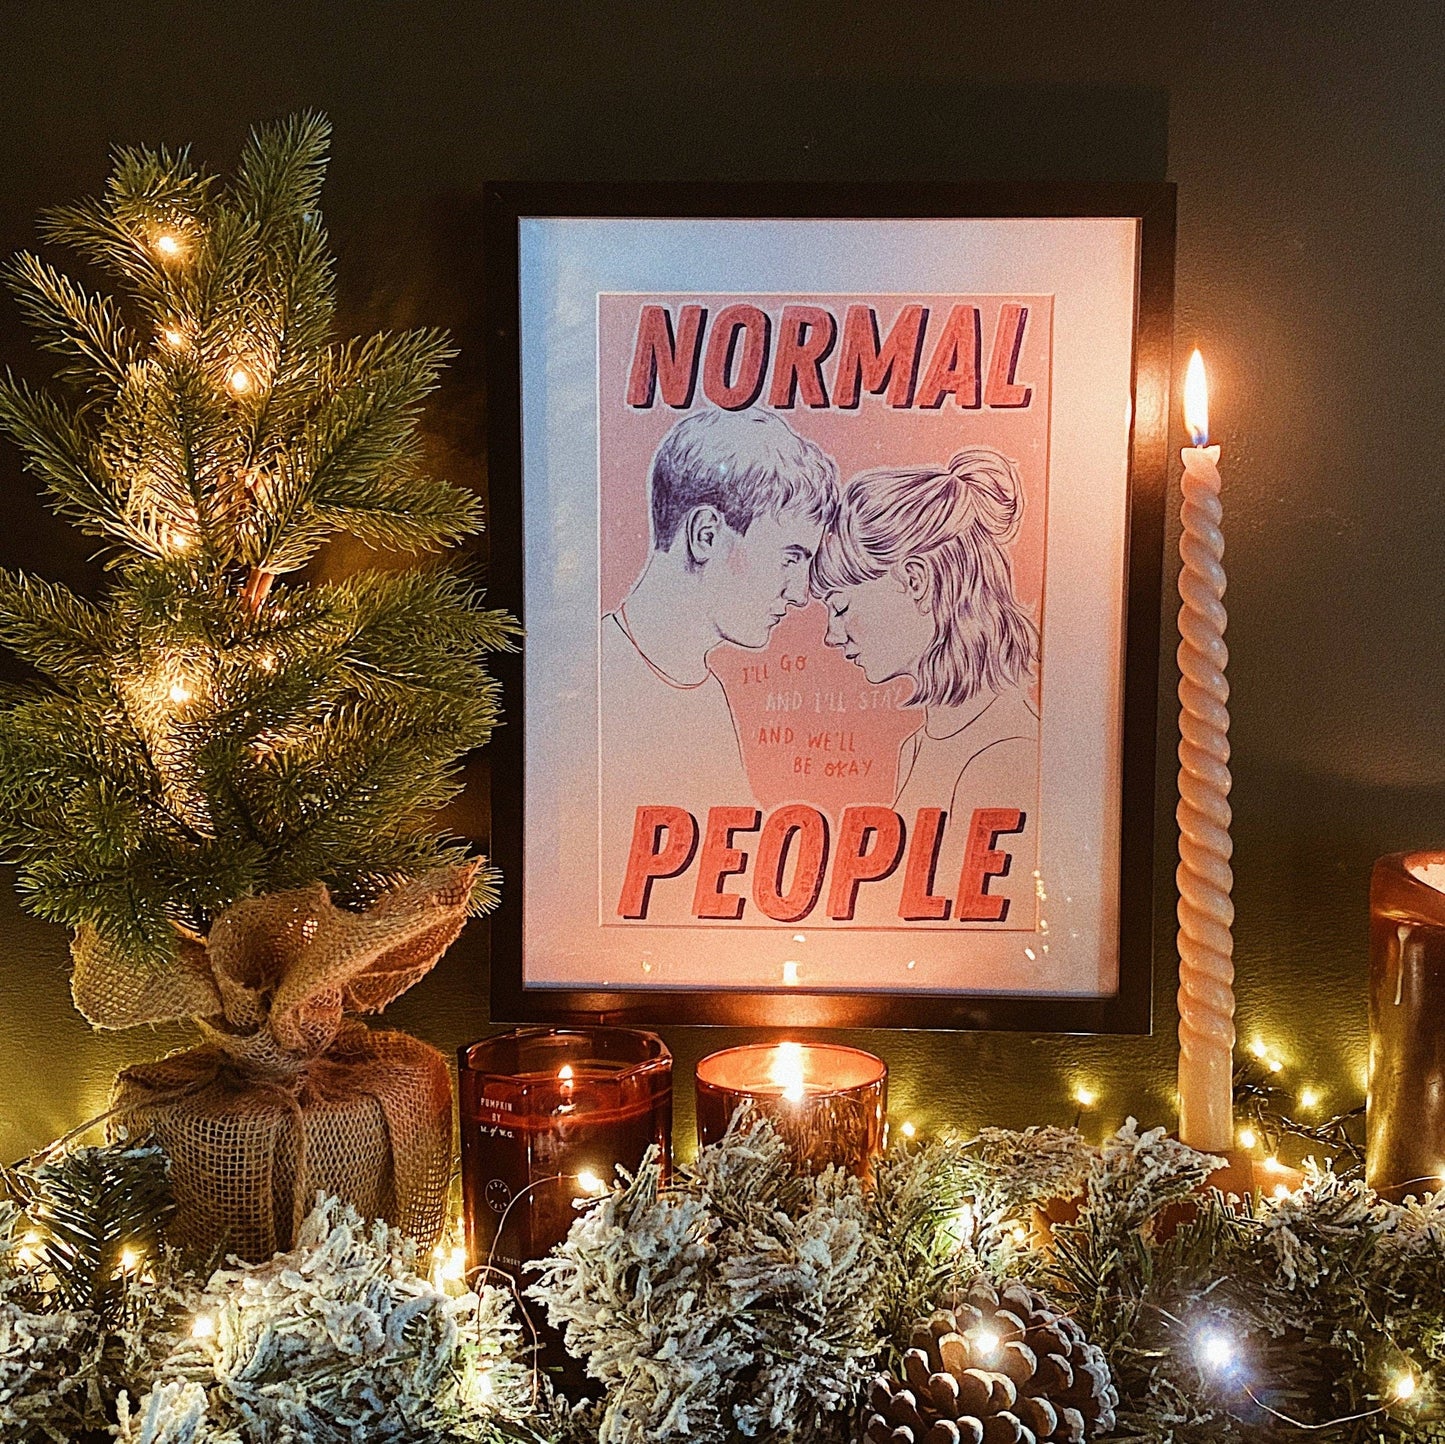 Normal People A4 Print